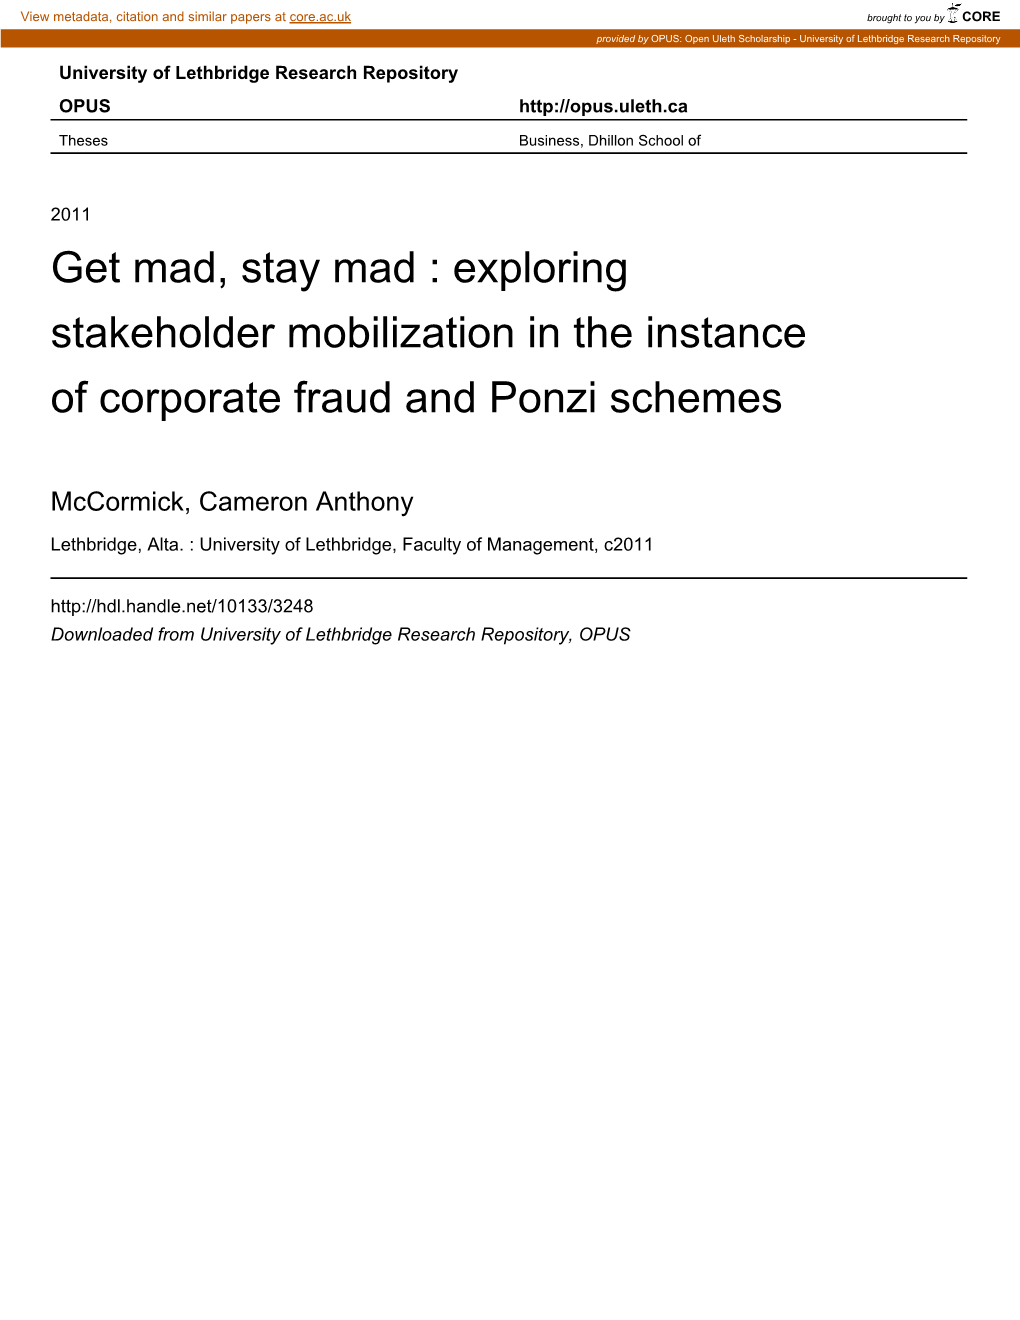 Exploring Stakeholder Mobilization in the Instance of Corporate Fraud and Ponzi Schemes